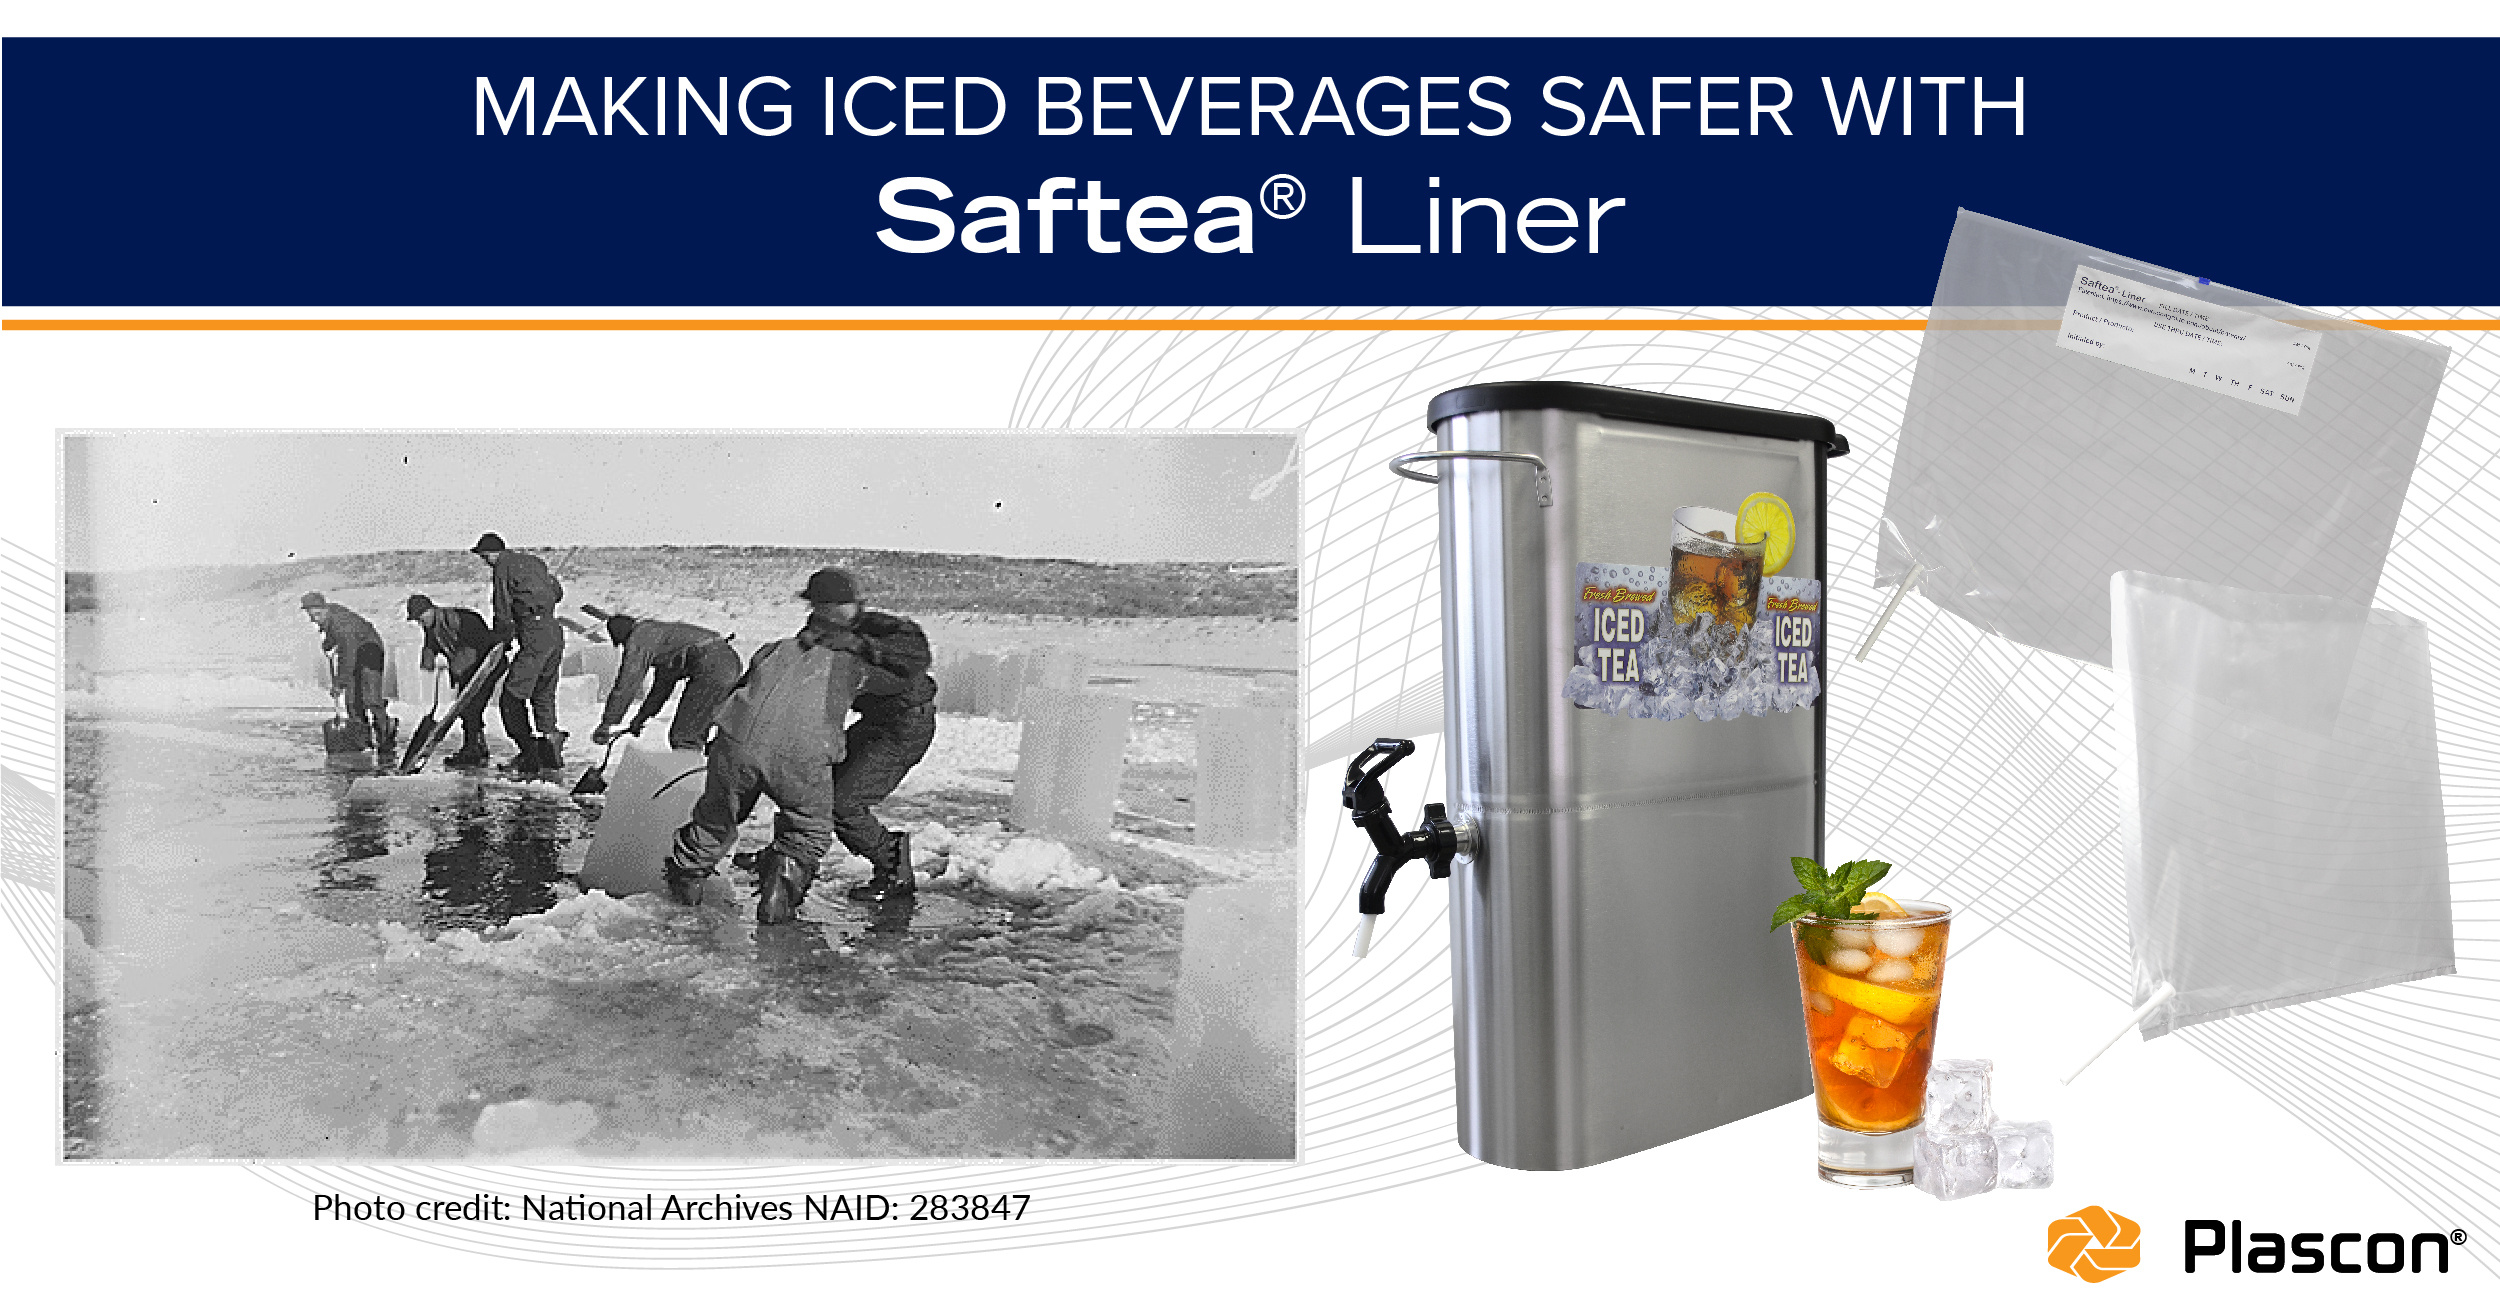 history of ice and iced tea